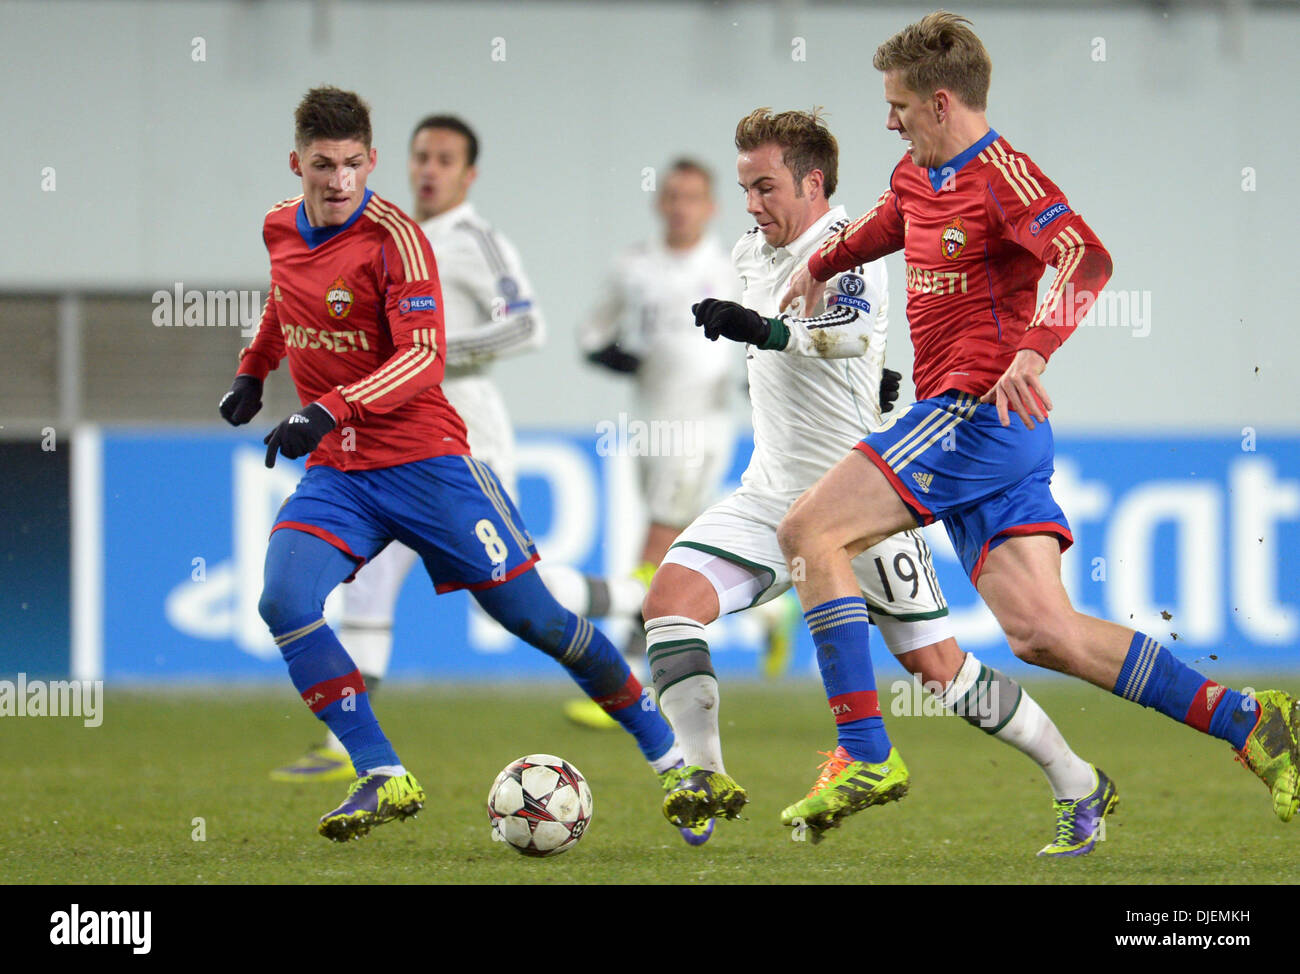 Moscow, Russia. 27th Nov, 2013. Moscow's Steven Zuber (L) and Pontus Wernbloom (R) fight for the ball with Munich's Mario Goetze during the UEFA Champions League Group D soccer match between CSKA Moscow and FC Bayern Munich at Arena Chimki in Moscow, Russia, 27 November 2013. Photo: Andreas Gebert/dpa/Alamy Live News Stock Photo